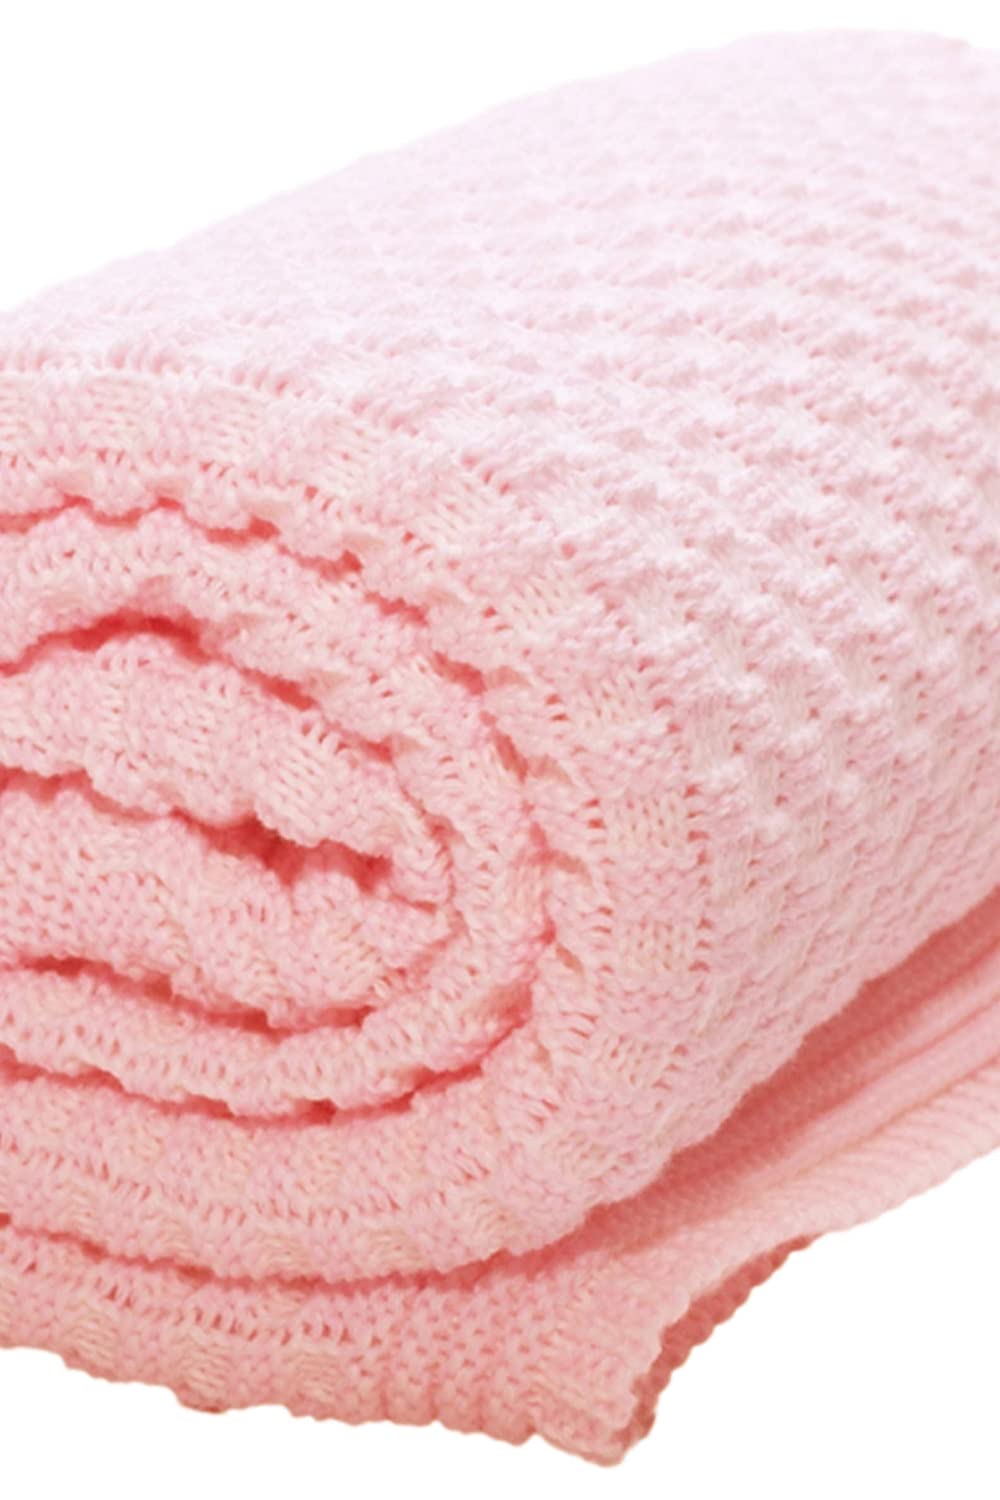 Wallaboo Eden Baby Blanket 100% Organic Cotton with Cable Pattern Cuddly Blanket Crawling Blanket Beautiful Knitted and Cuddly Soft Baby Blanket 90 x 70 cm Pink